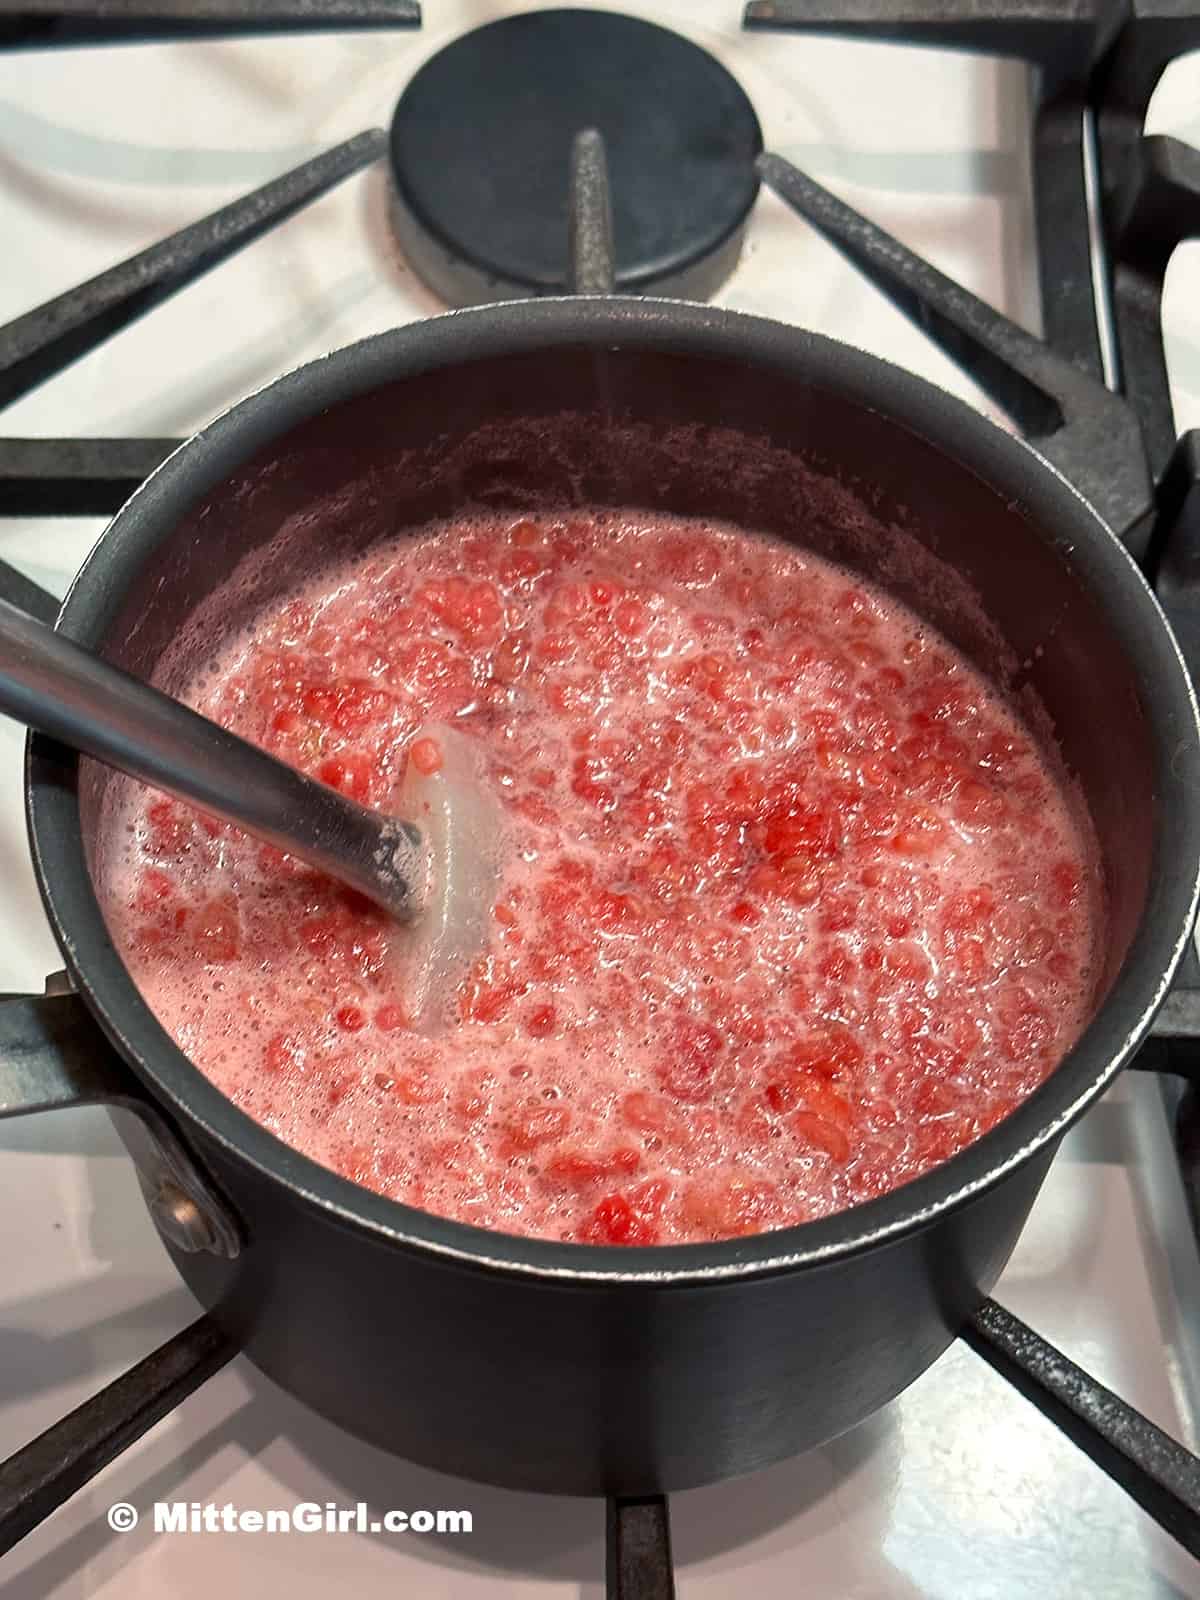 Raspberry syrup cooking and foaming up.